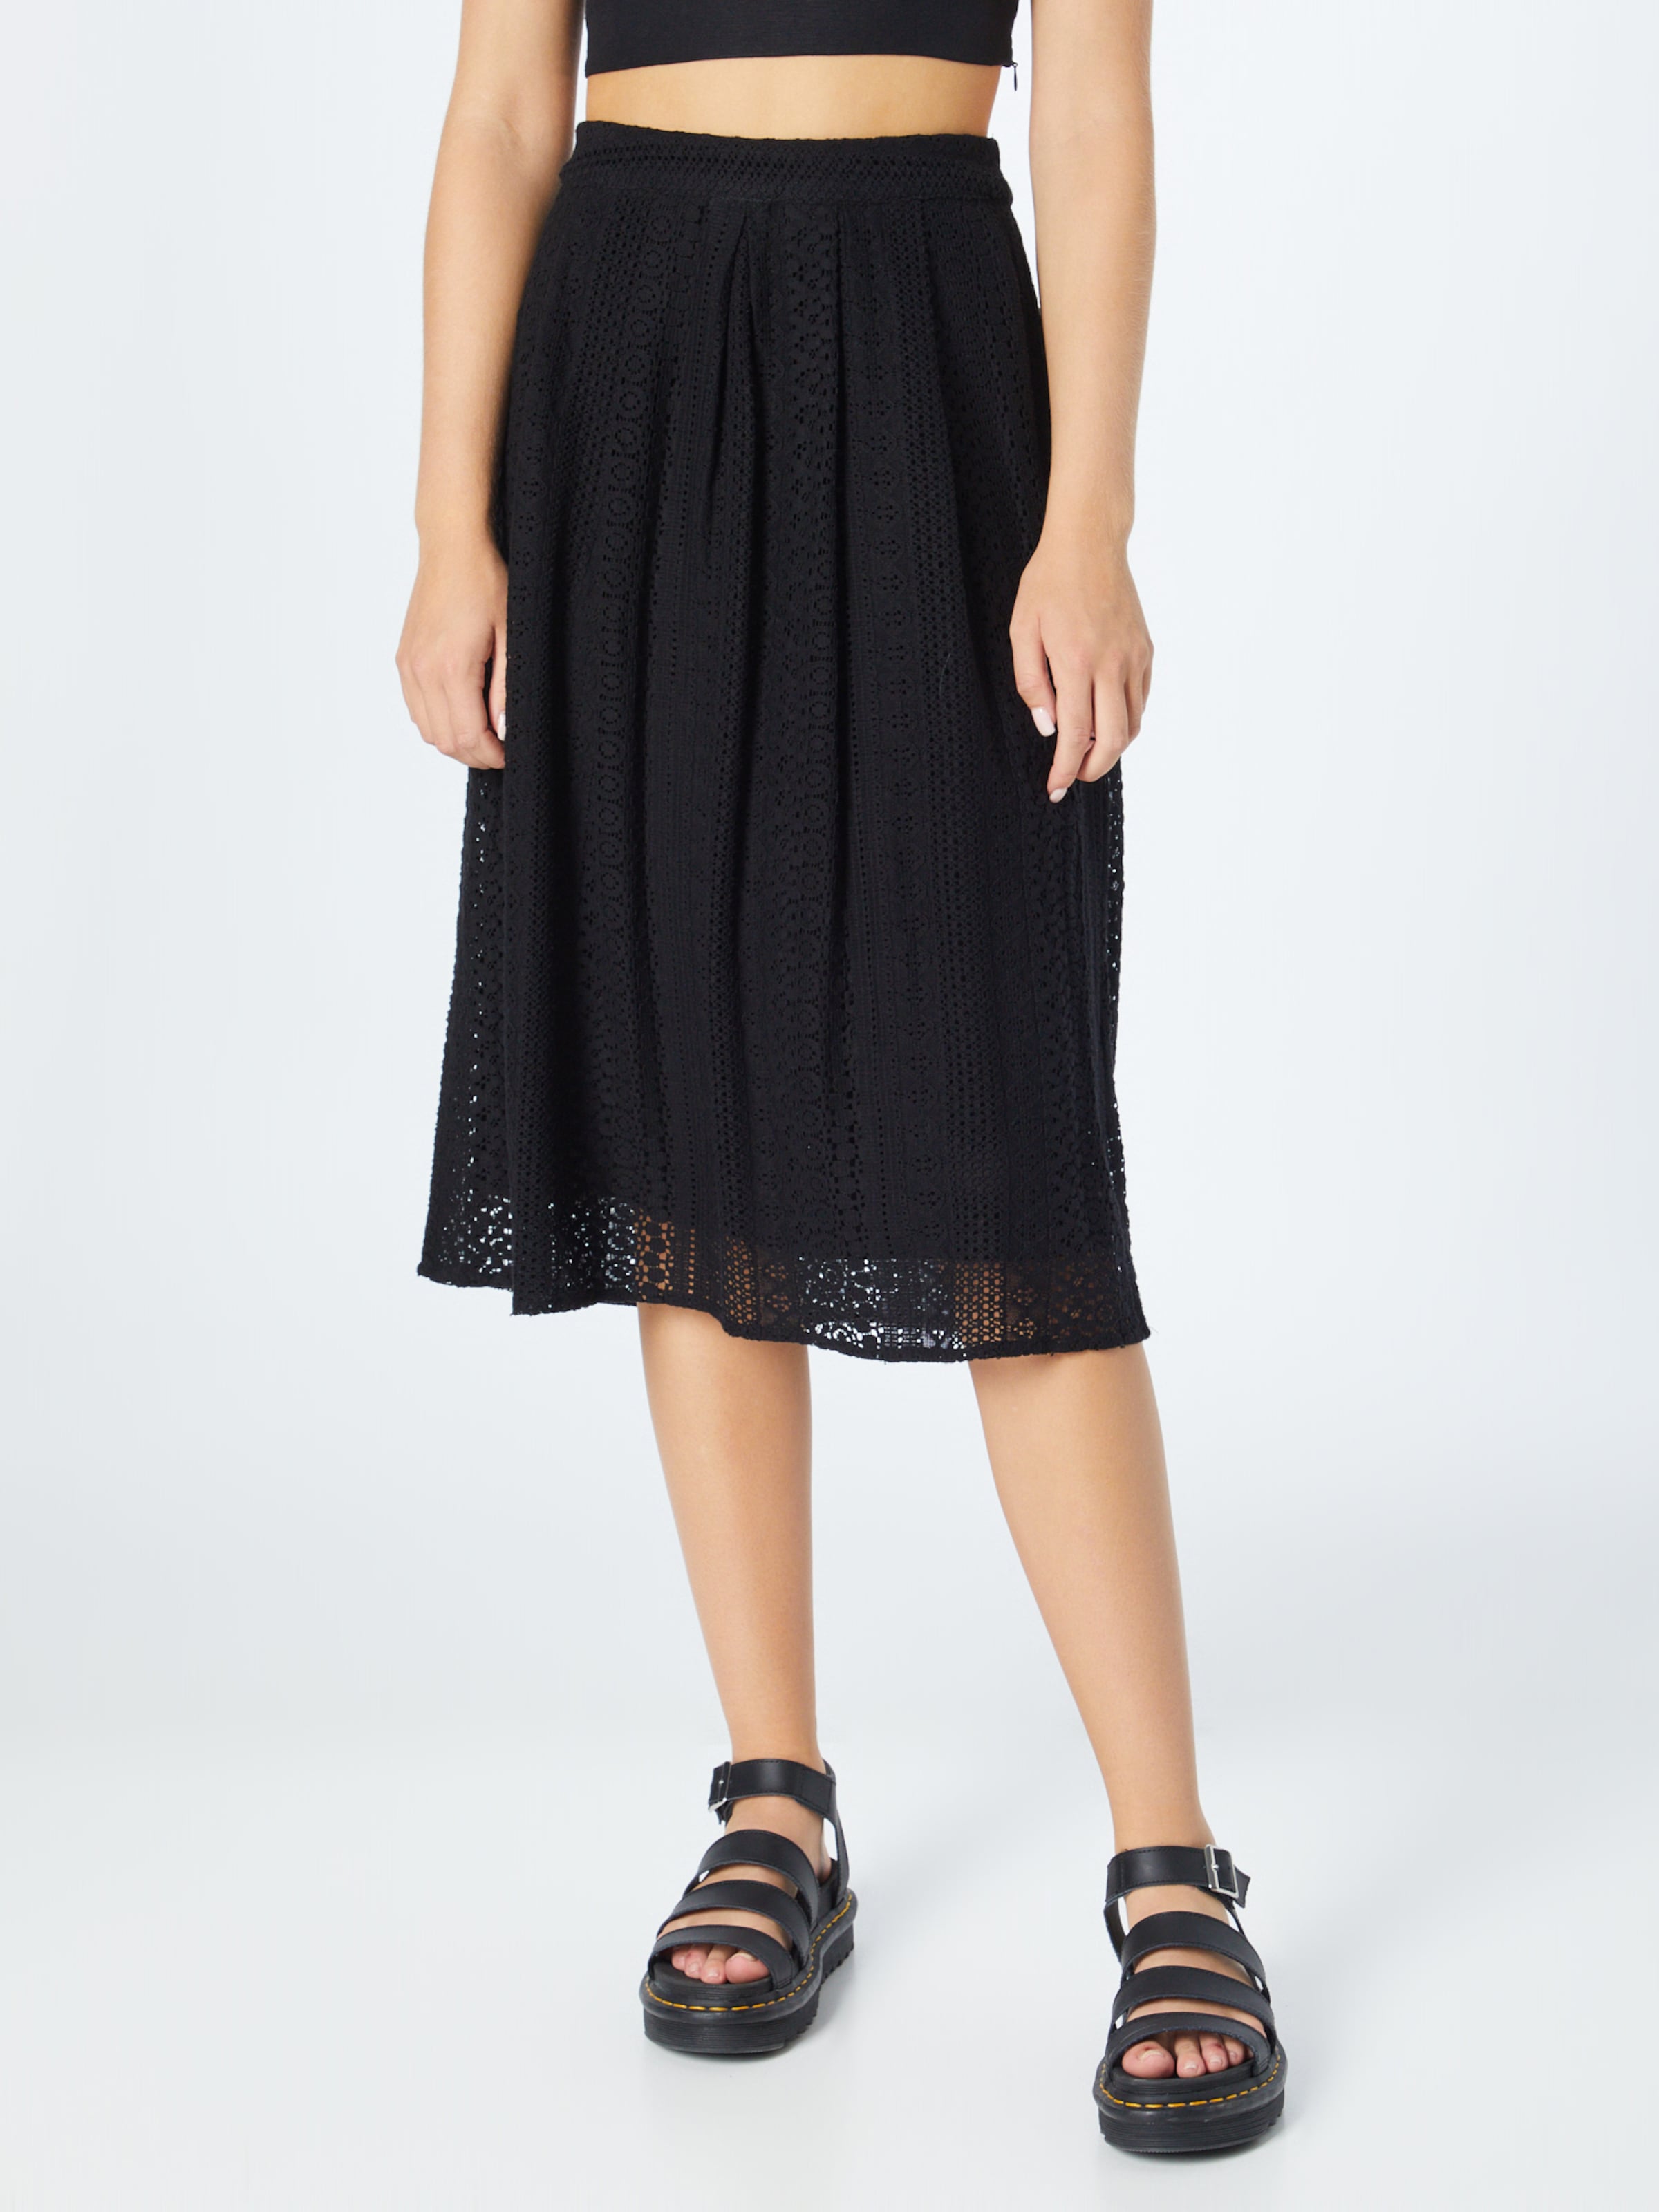 depositum Downtown stemme VERO MODA Skirt 'HONEY' in Black | ABOUT YOU